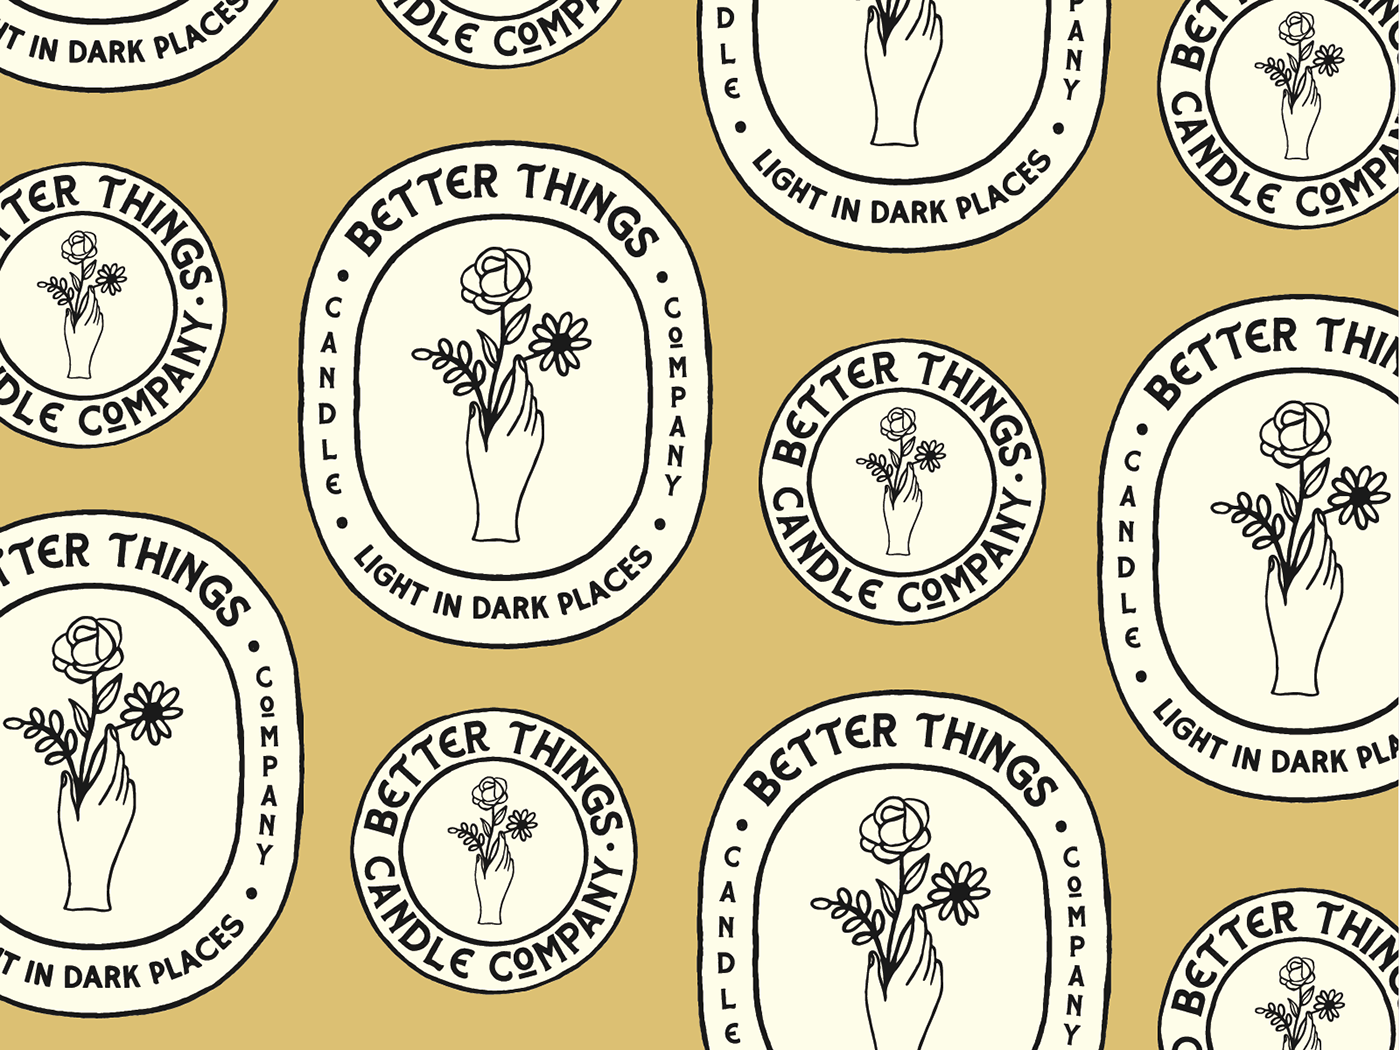 Branding design for Better Things Candle Company